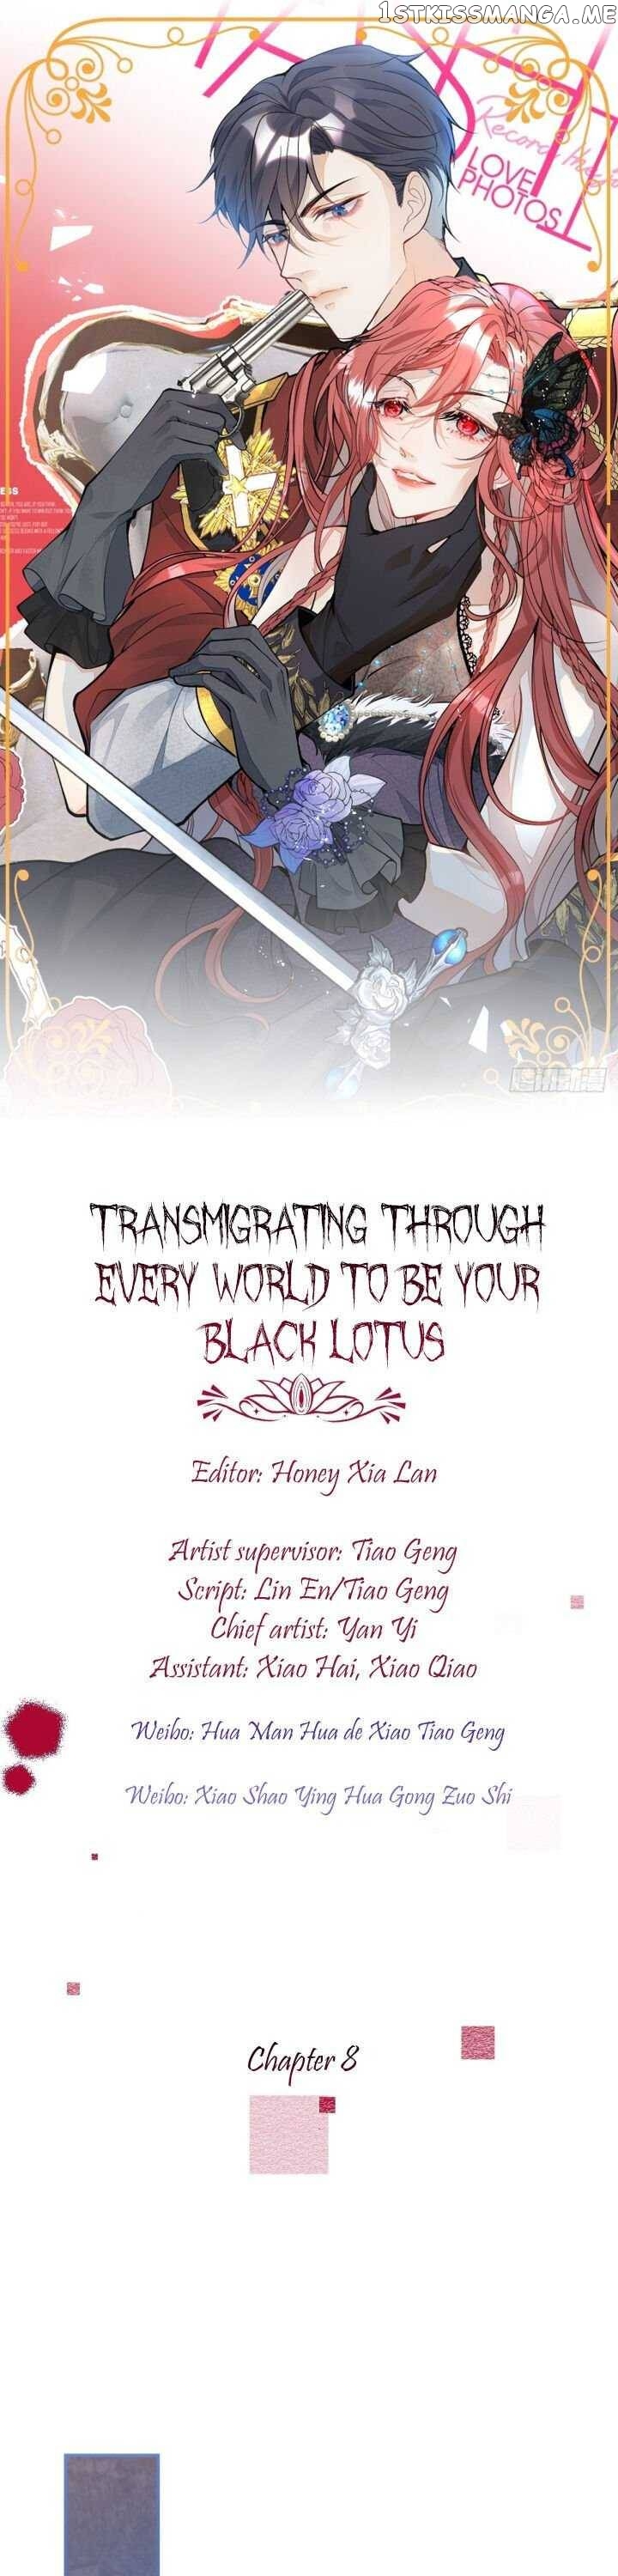 Transmigrating Through Every World To Be Your Black Lotus chapter 8